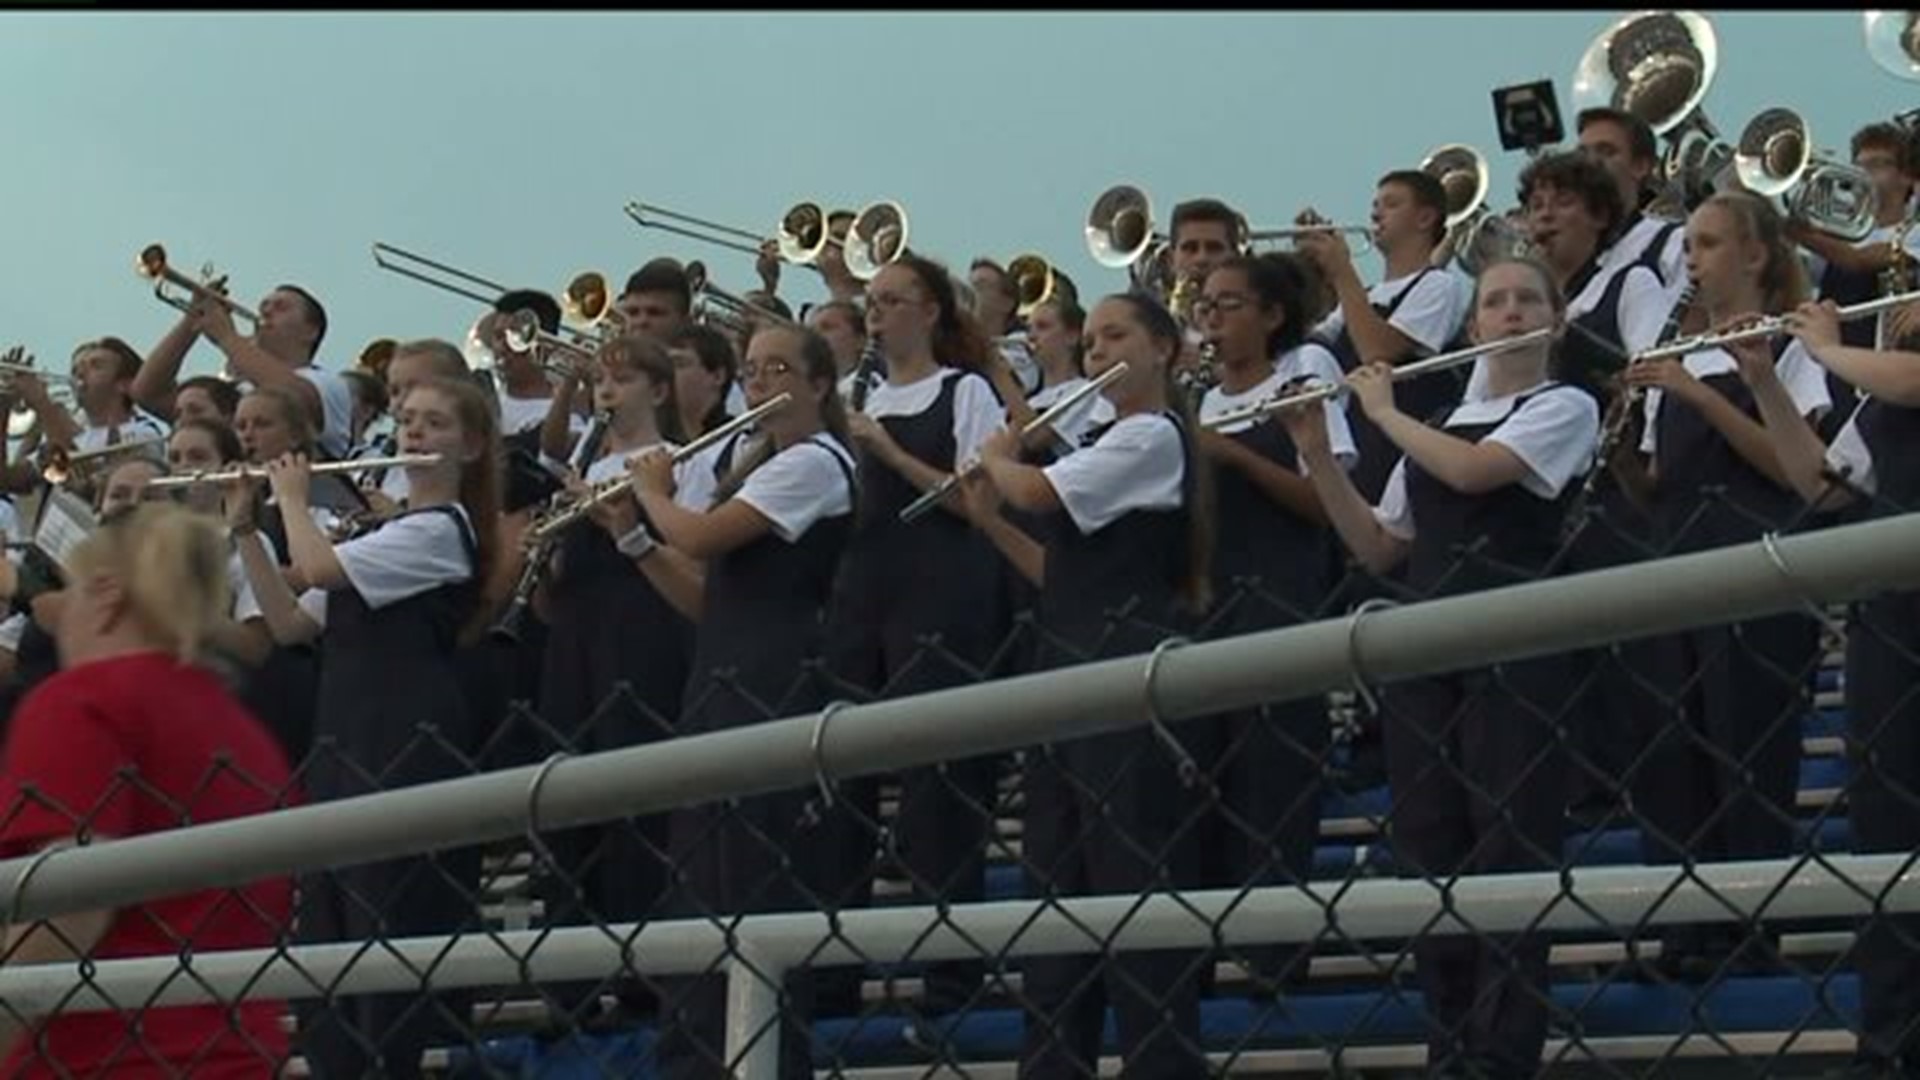 RED LAND CEDAR CLIFF MARCHING BANDS MERGE